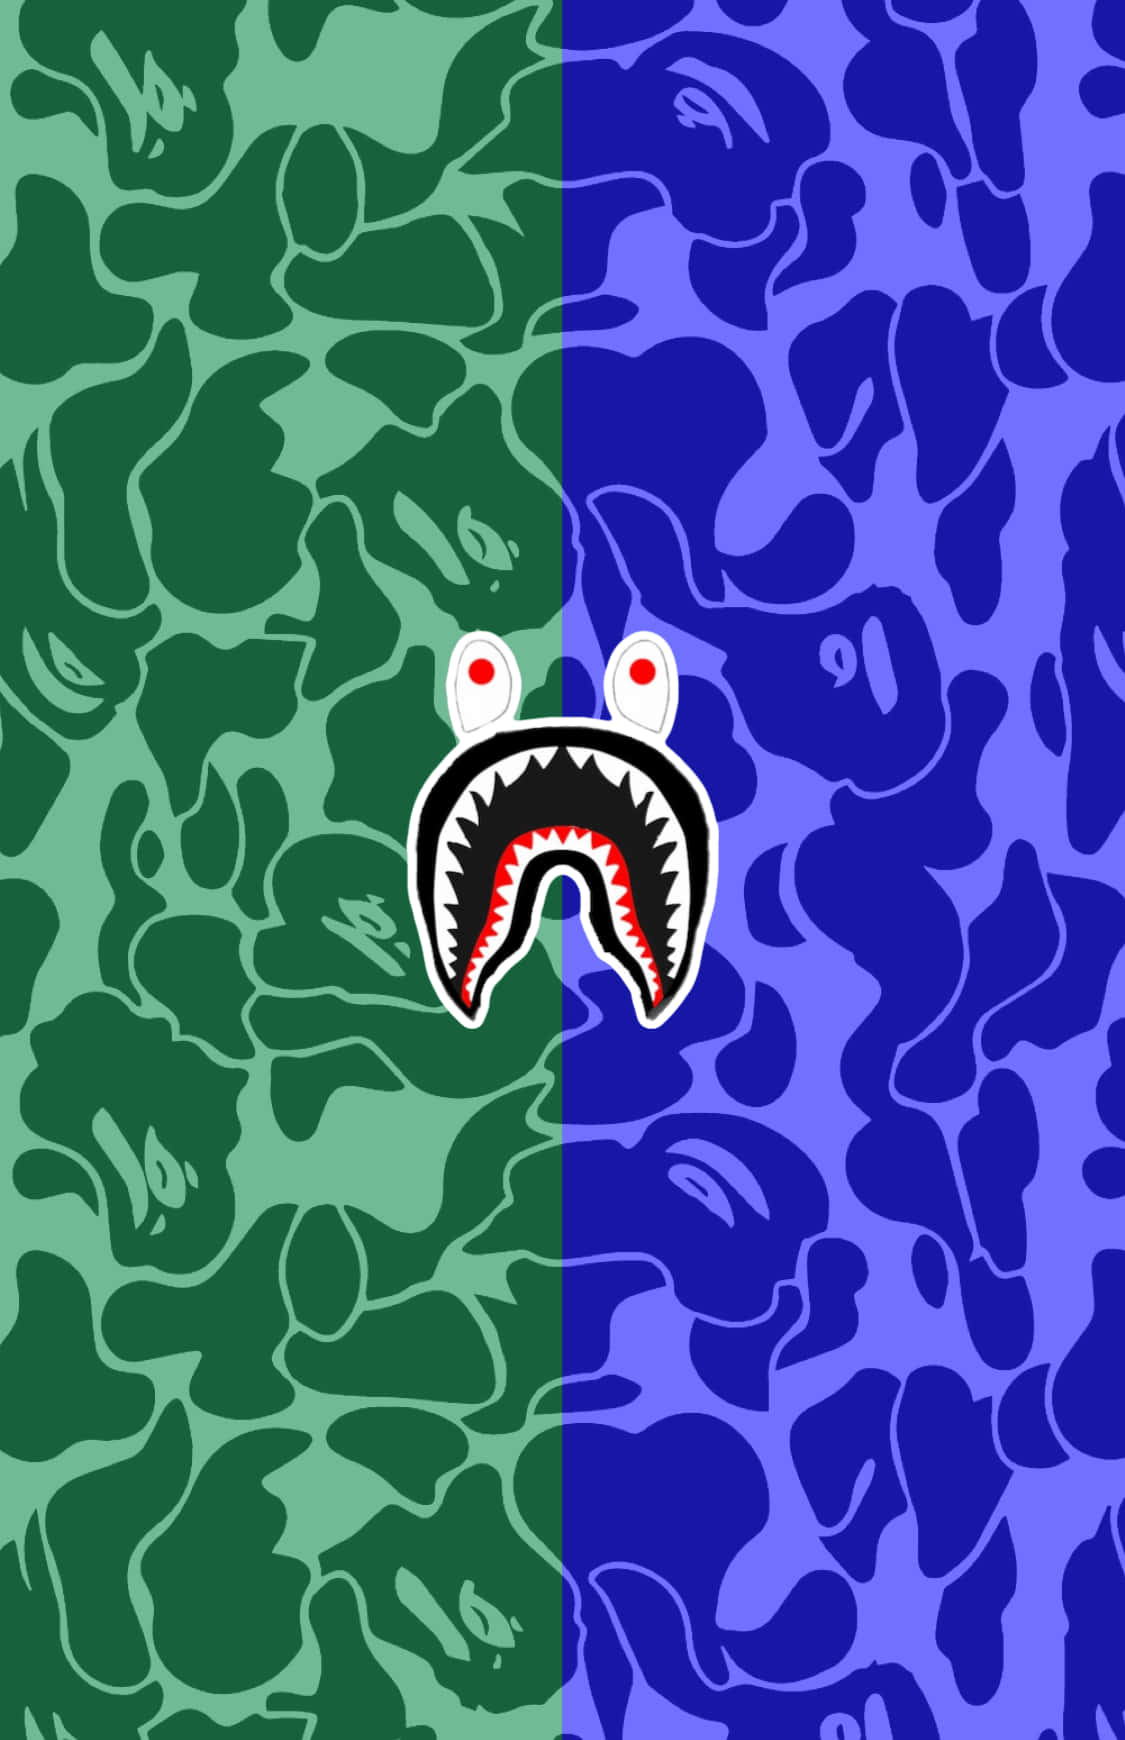 The Bape Iphone on Display Wallpaper